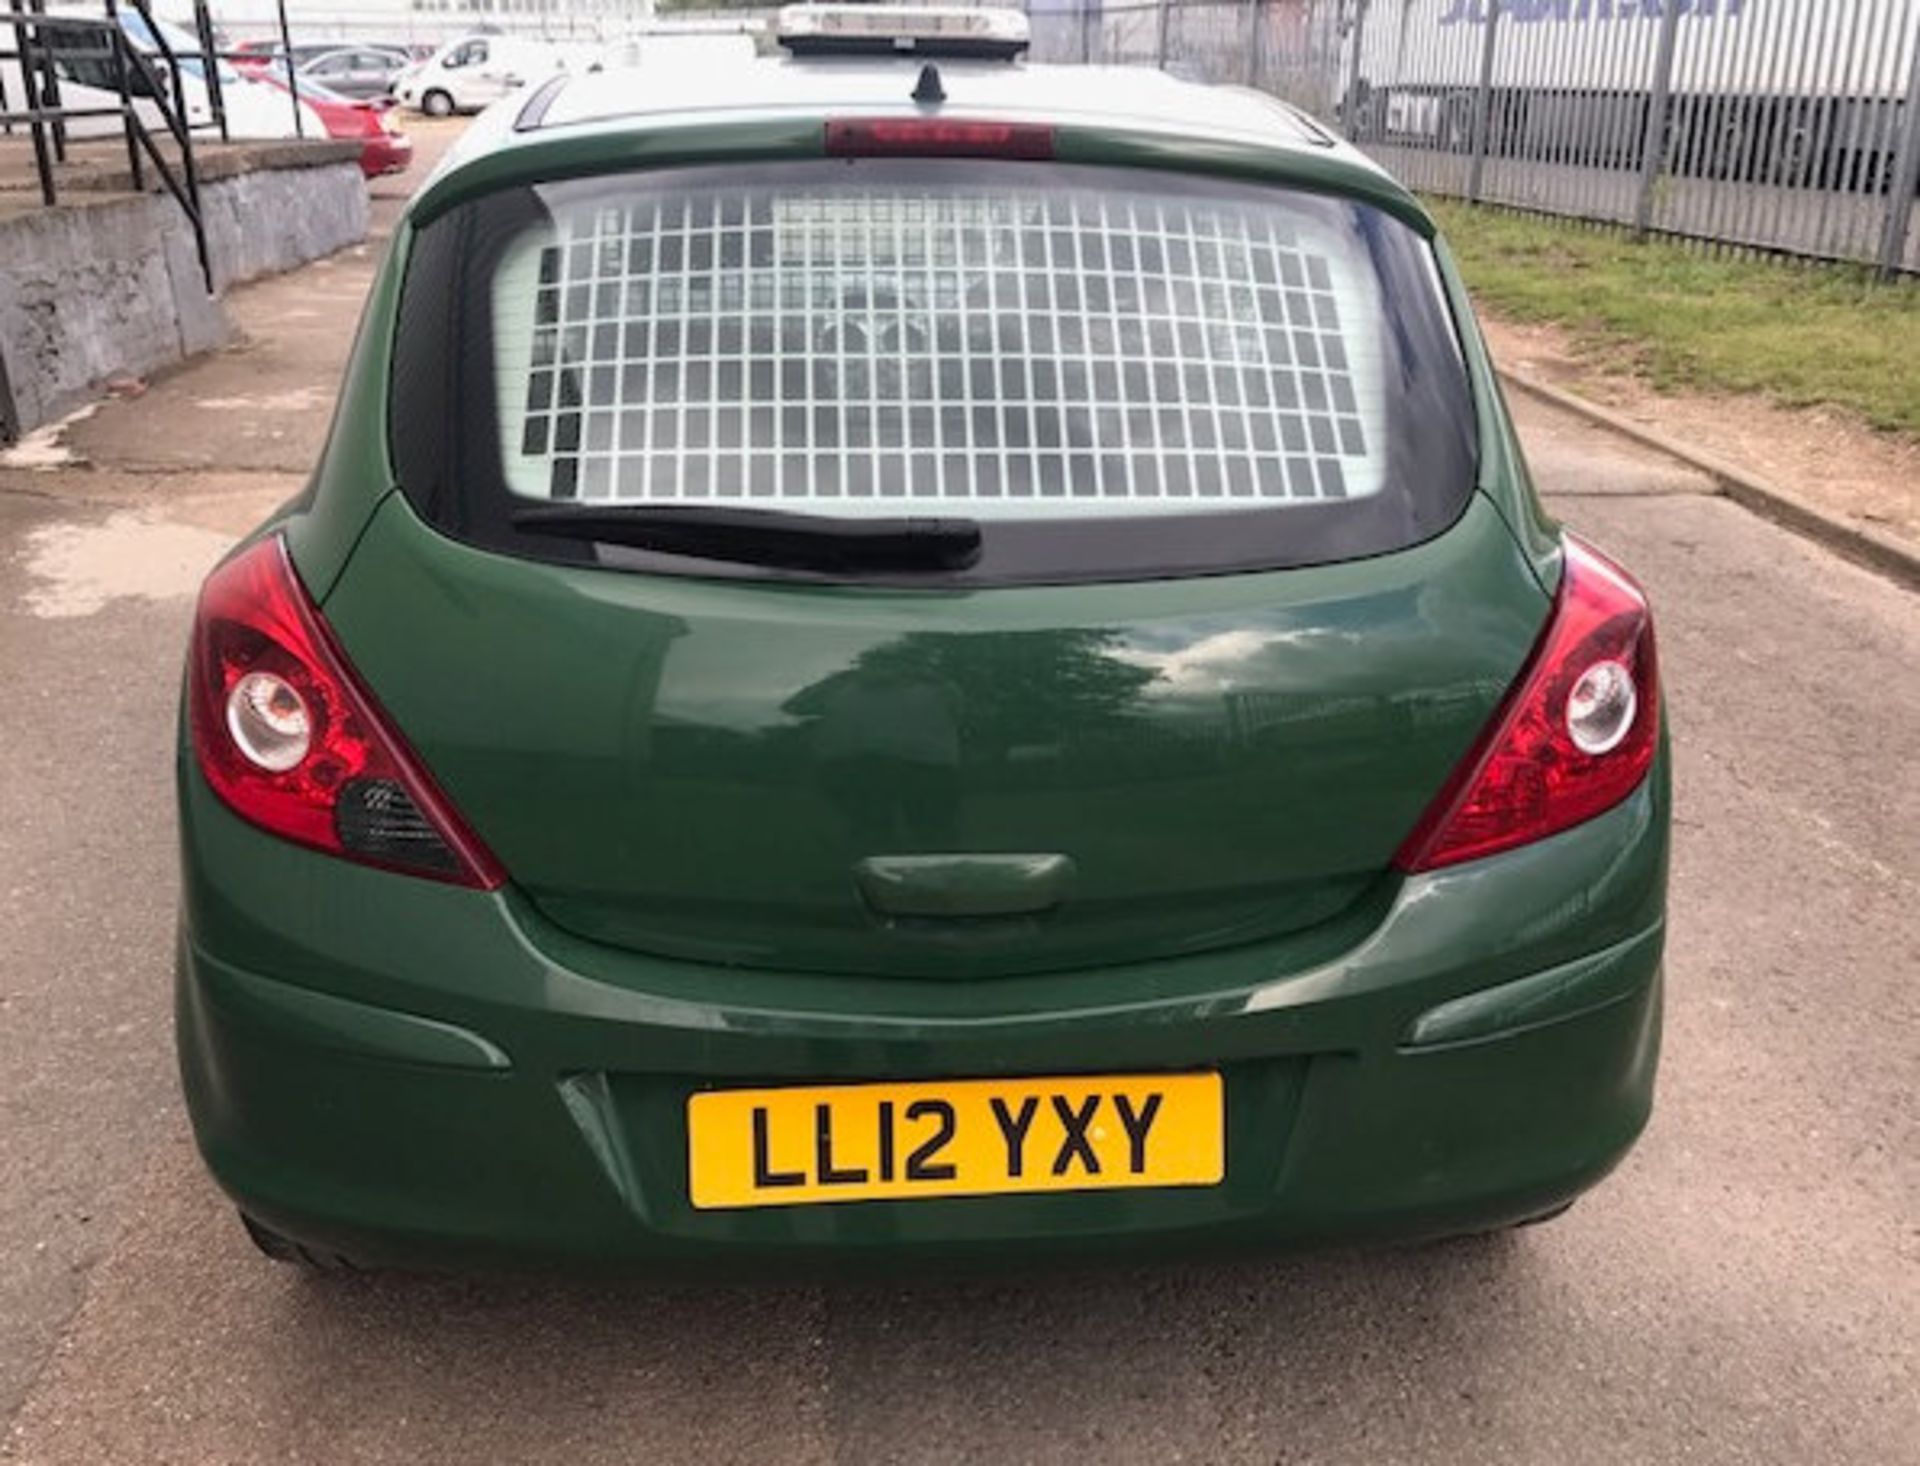 2012 Vauxhall Corsa 1.3 CDTI 3 Dr Panel Van&nbsp;- CL505 - Location: Corby, Northamptonshire - Image 11 of 11